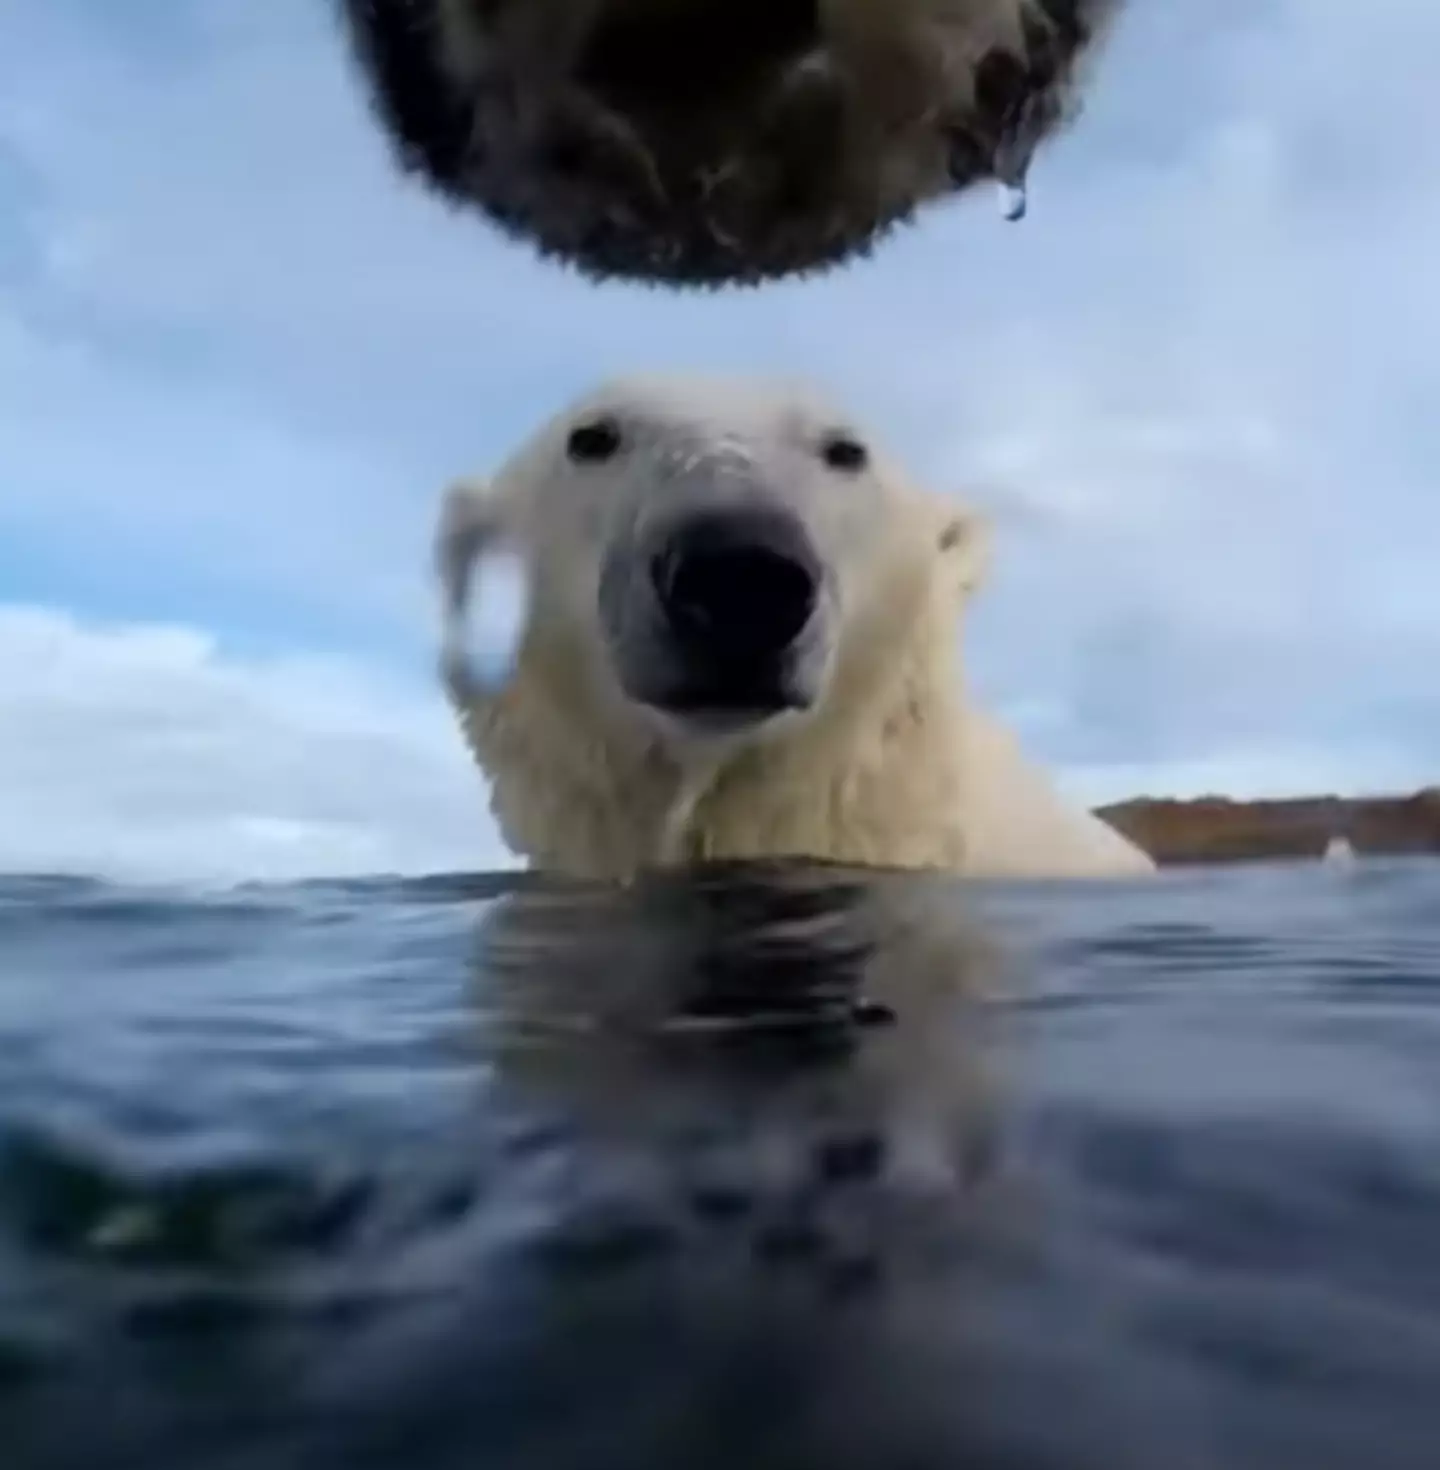 Chilled out polar bear waves at the camera before taking a closer